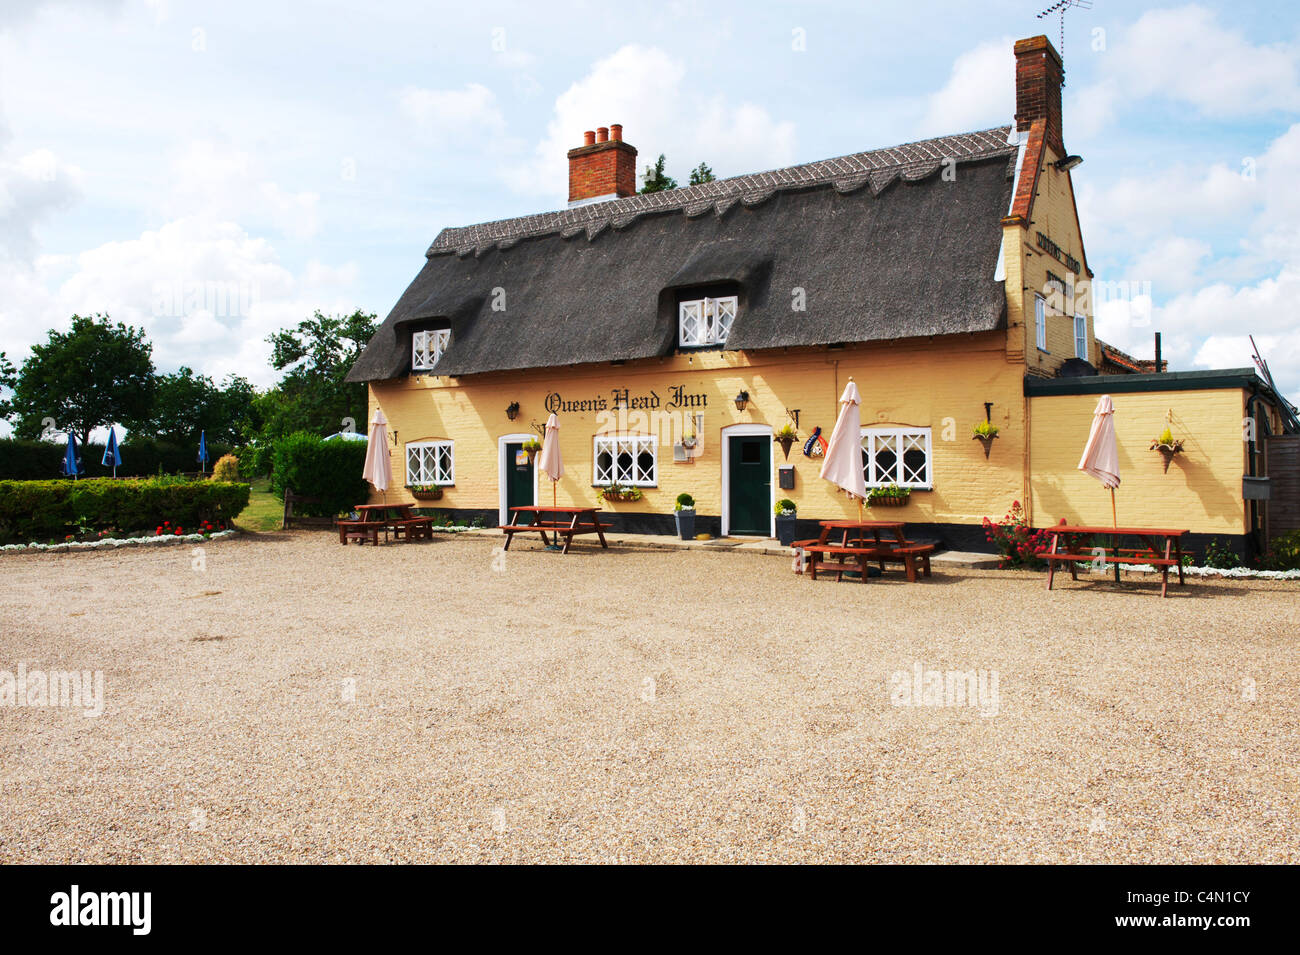 The Queens Head, public house near Halesworth, Suffolk. Typical historical country pub with a thatched roof Stock Photo